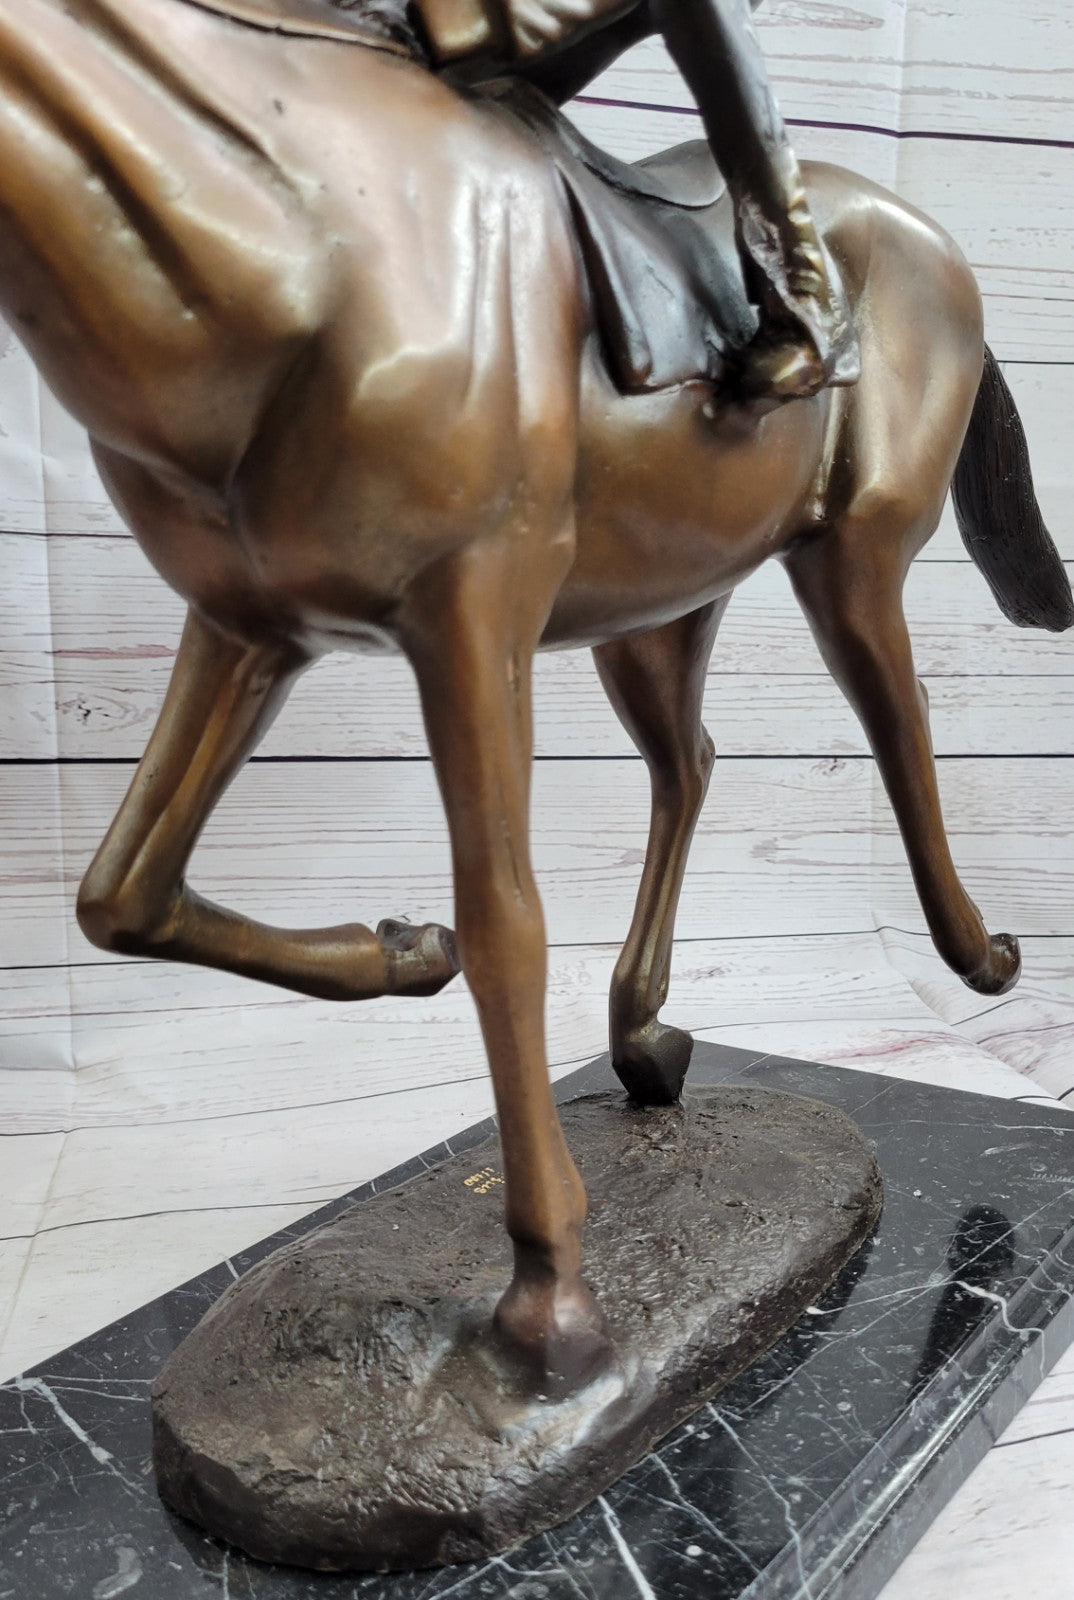 Marius Male Jockey Horse Race Bronze Sculpture - Handcrafted Limited Edition Collectible